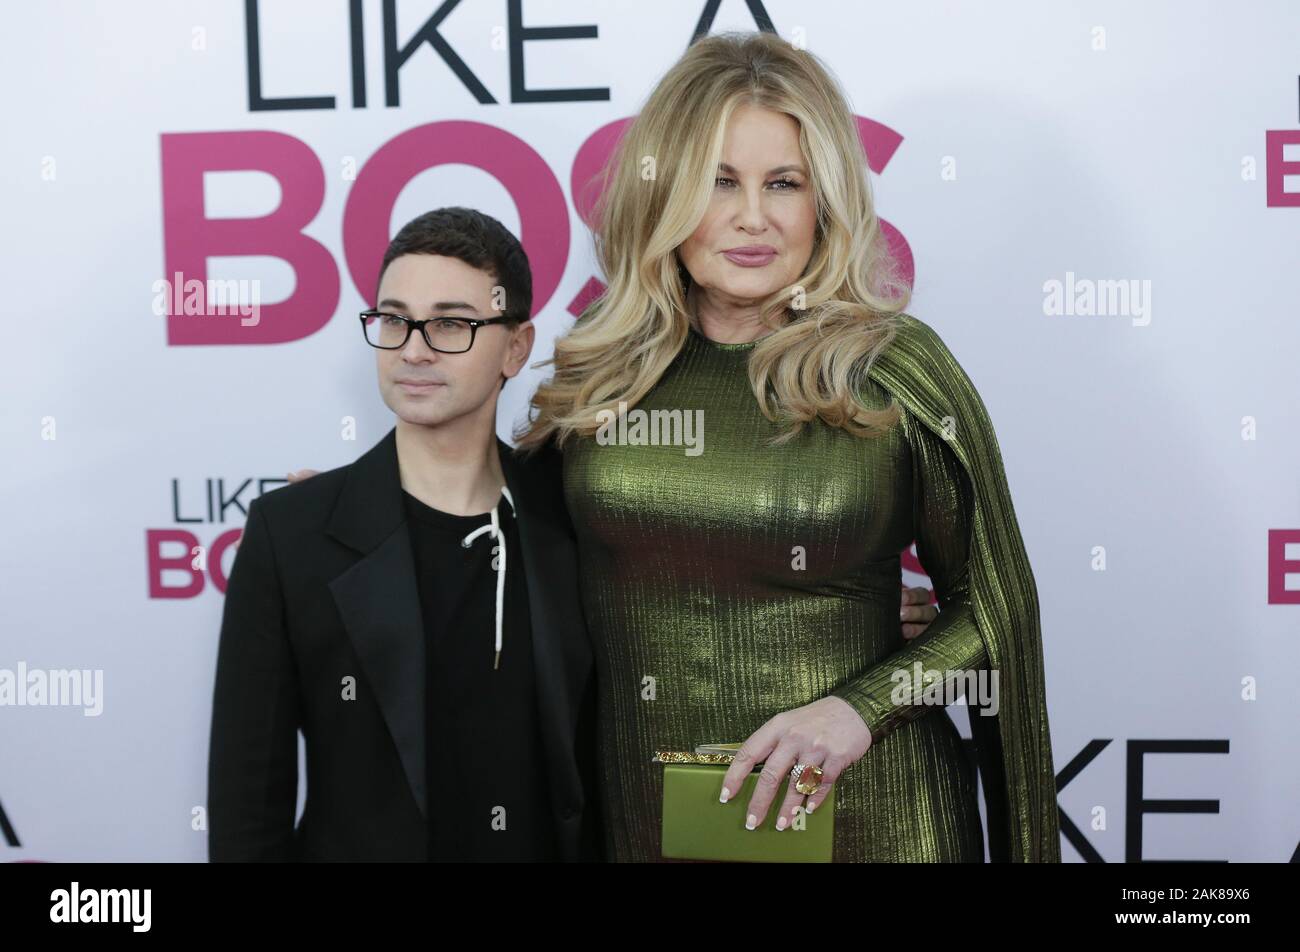 New York, United States. 07th Jan, 2020. Christian Siriano and Jennifer Coolidge arrive on the red carpet at the world premiere of 'Like A Boss' at SVA Theater on Tuesday, January 7, 2020 in New York City. Photo by John Angelillo/UPI Credit: UPI/Alamy Live News Stock Photo